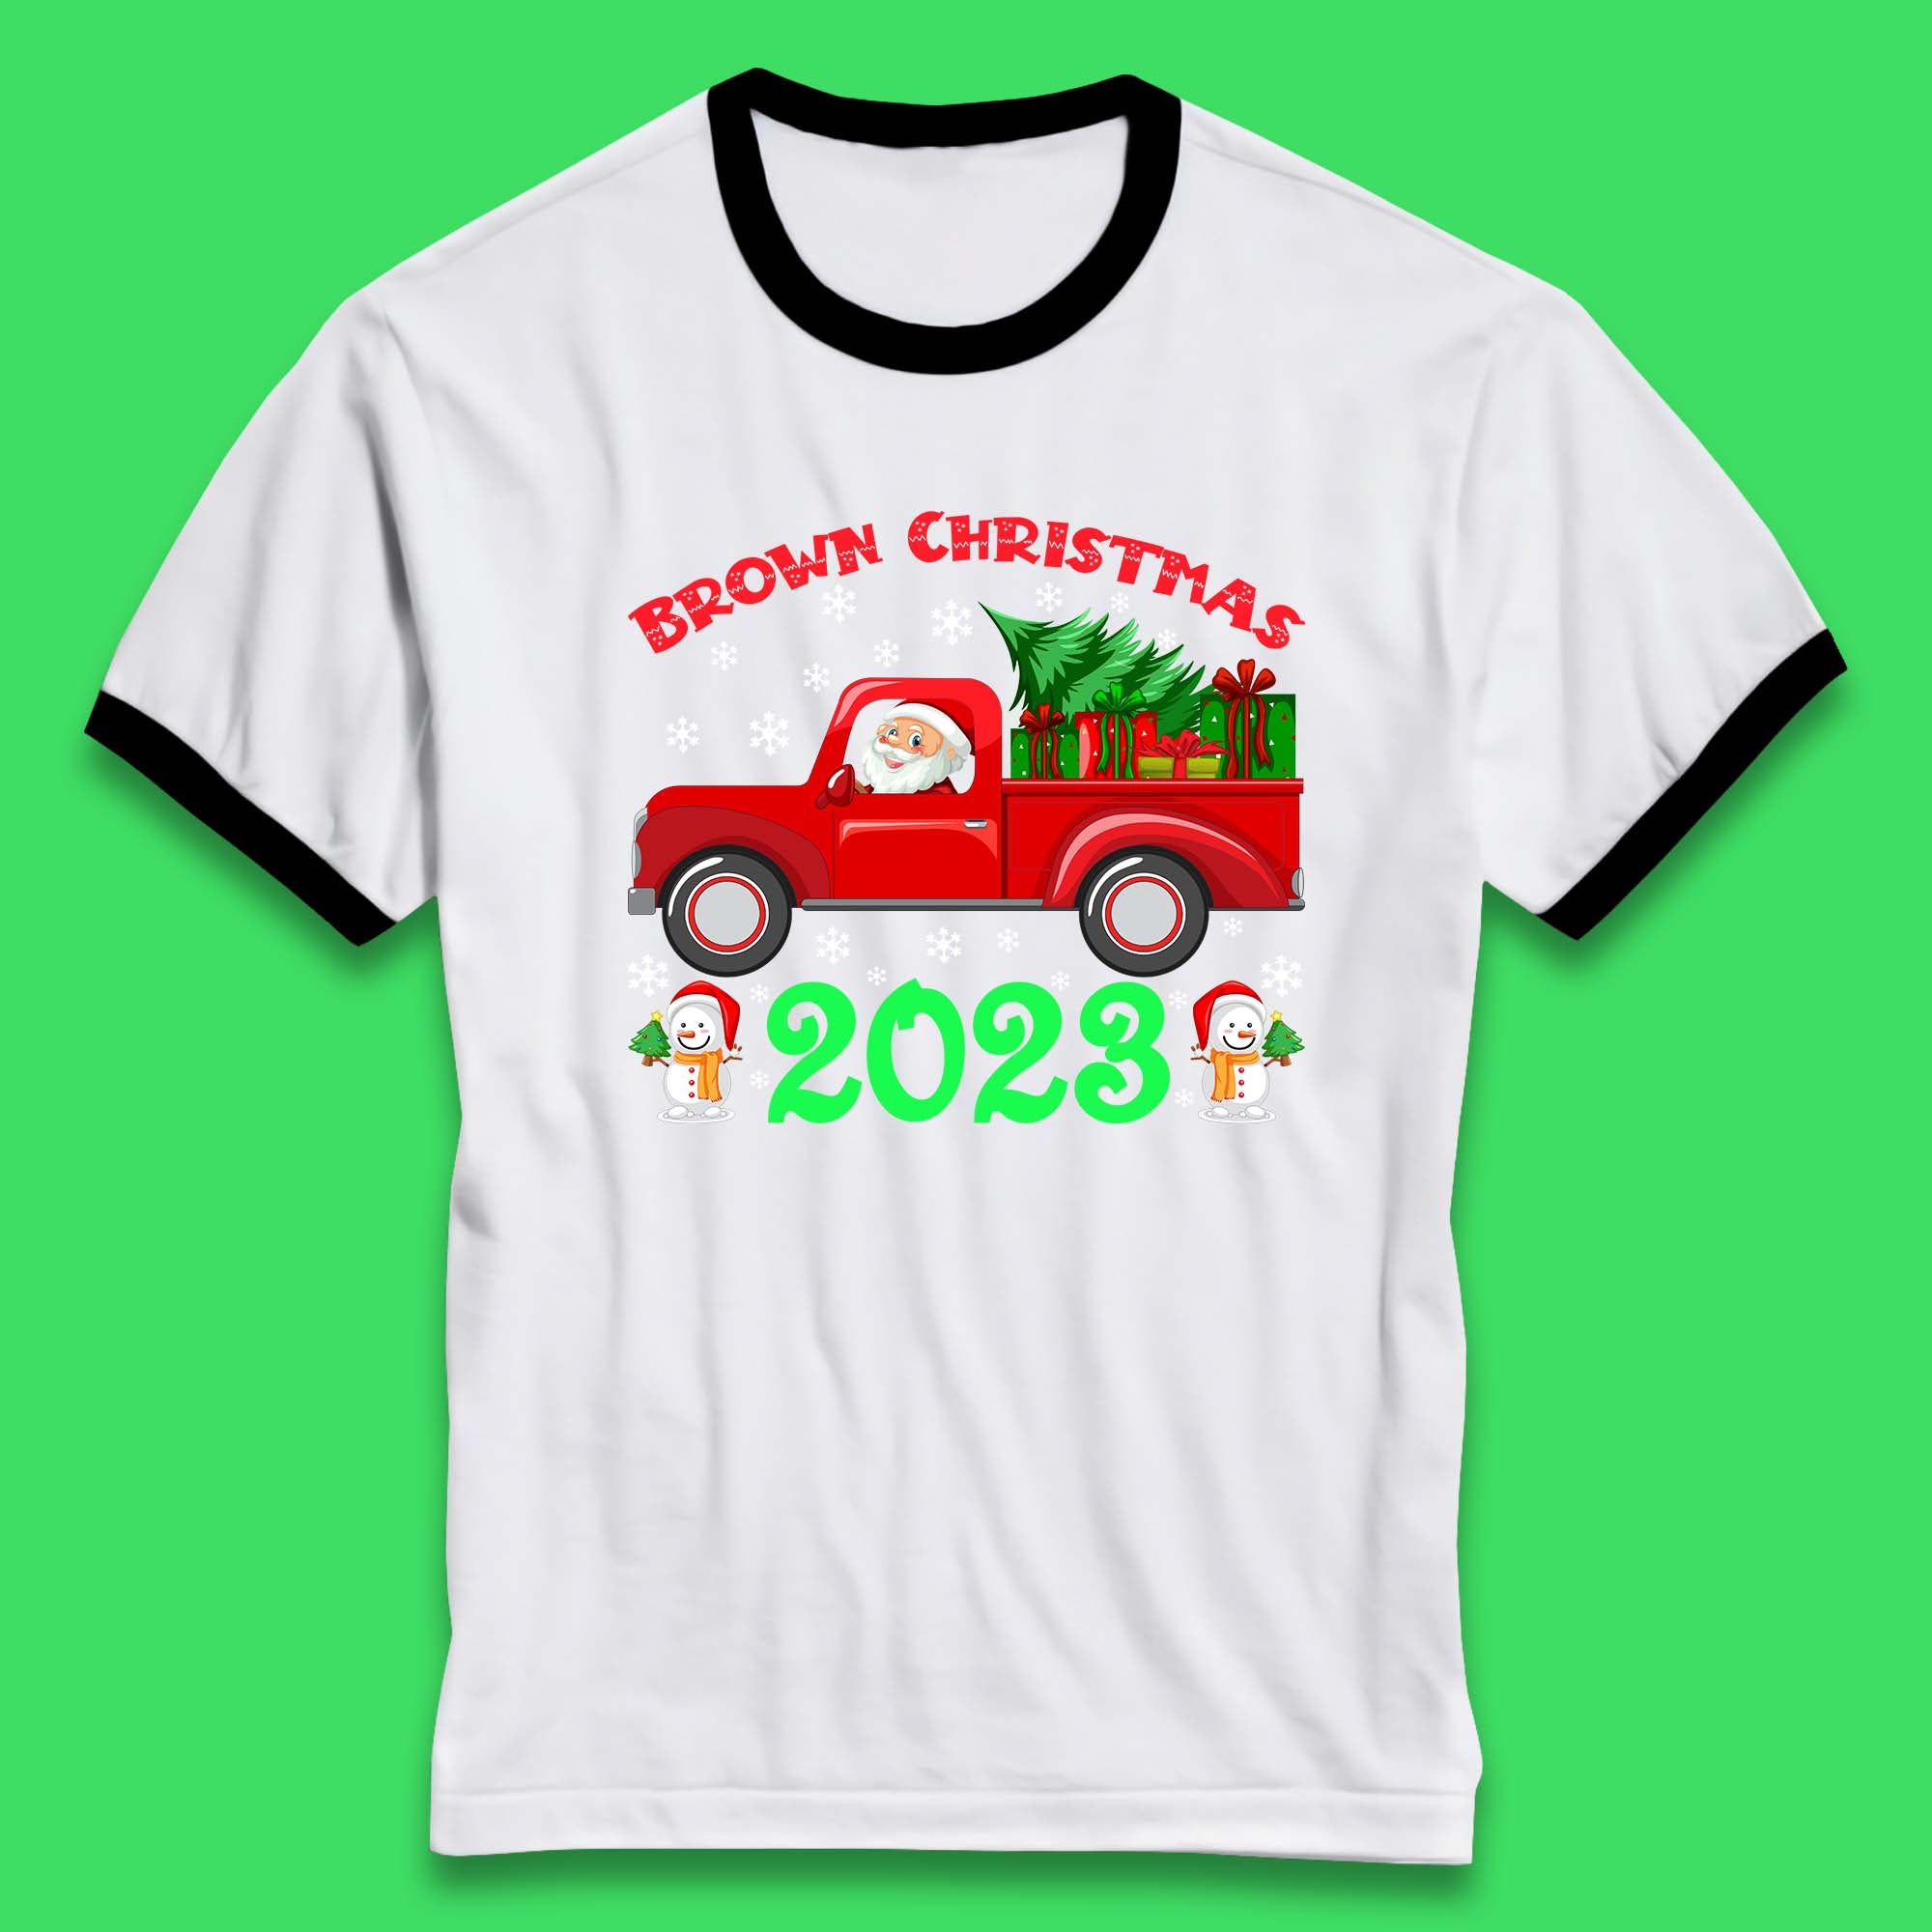 Brown Christmas 2023 Santa Claus Driving Truck With Christmas Tree To Delivery Christmas Gifts Xmas Ringer T Shirt